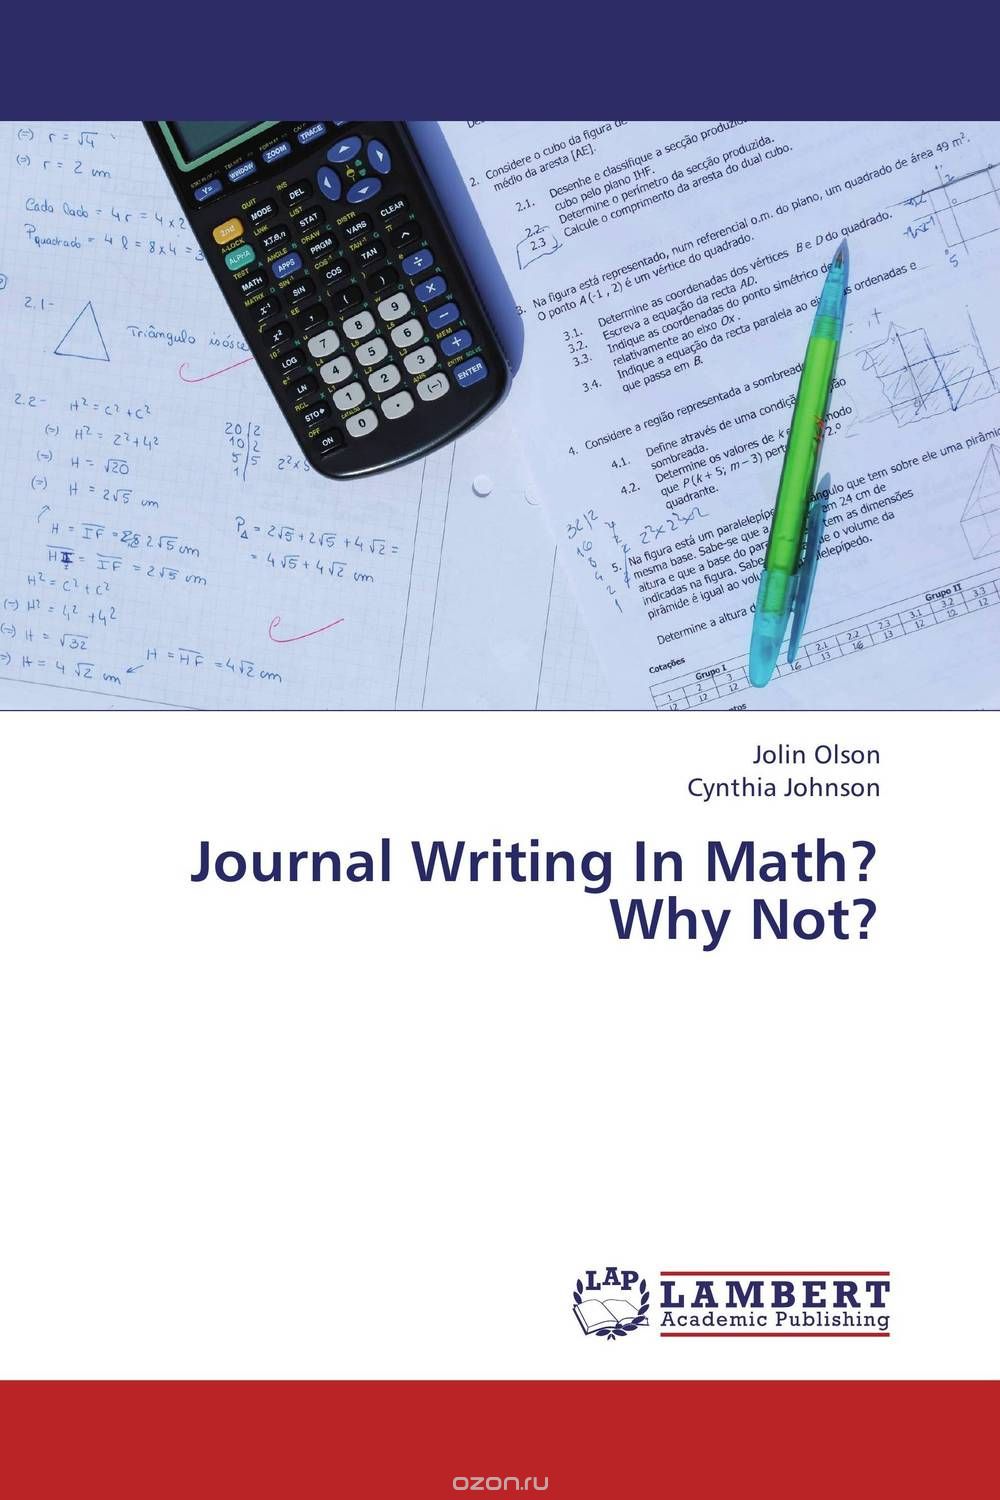 Journal Writing In Math? Why Not?